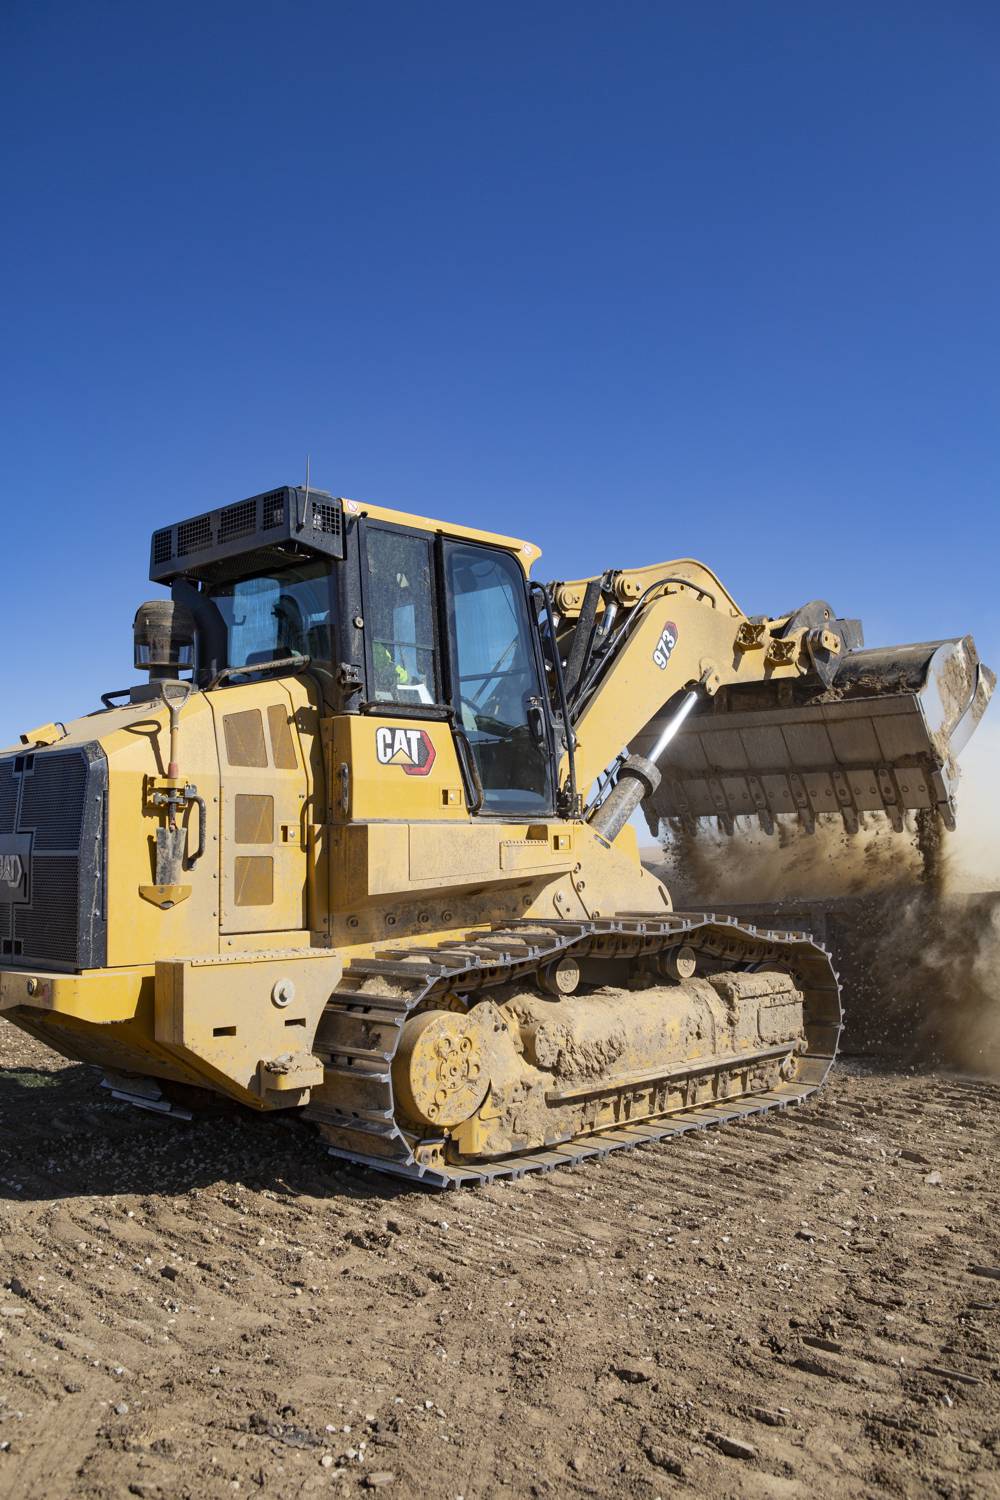 Caterpillar completes line-up with 973 Track Loader